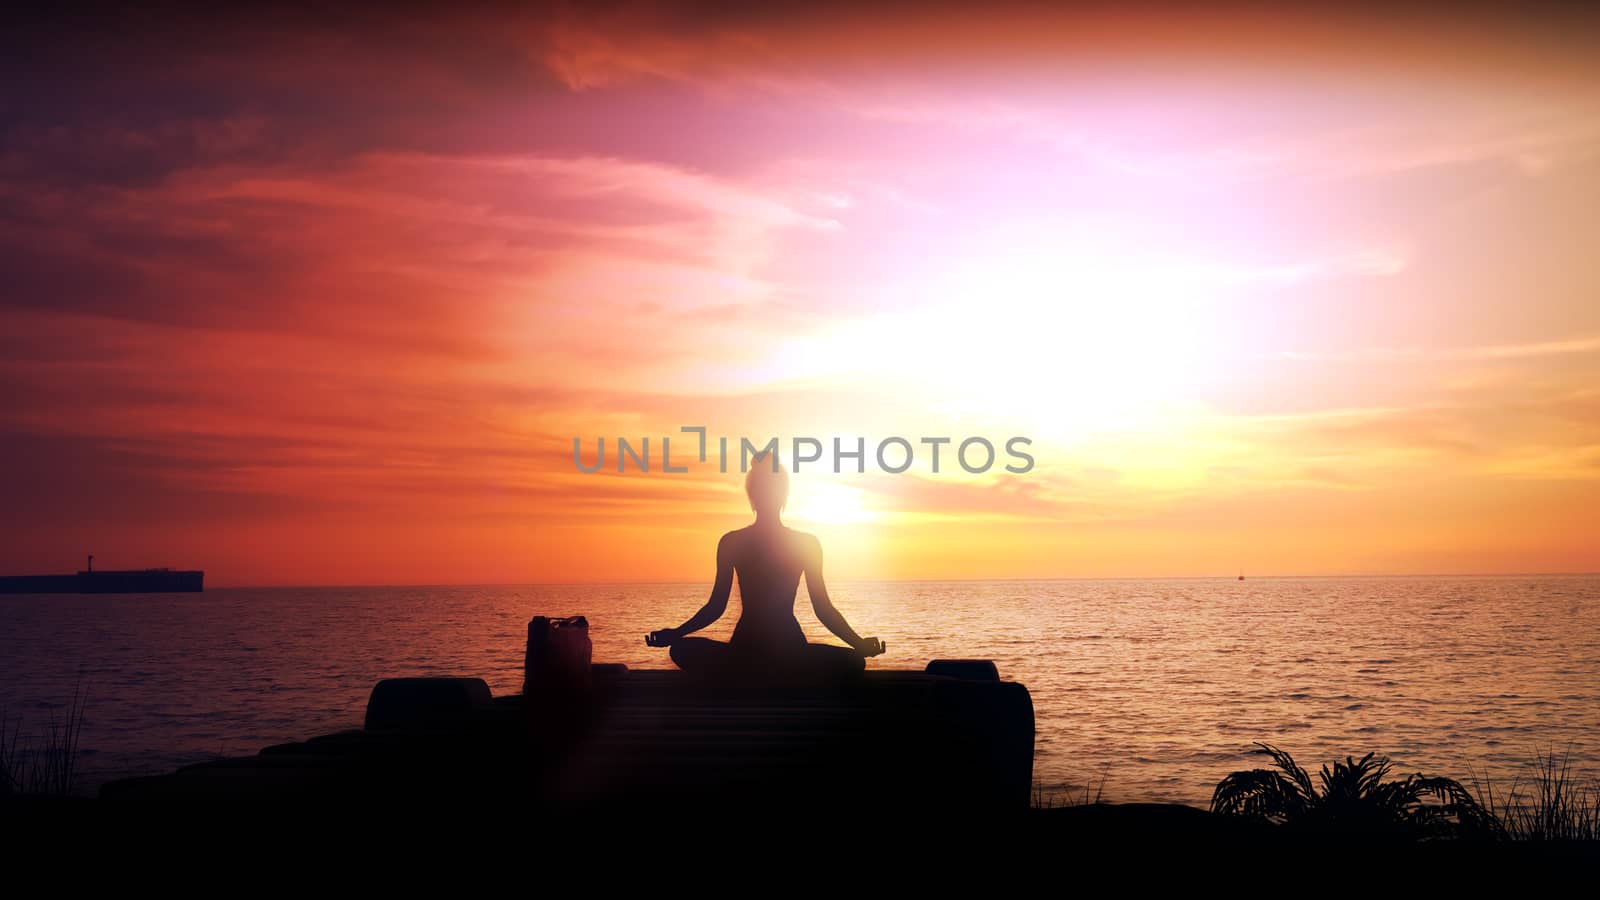 Silhouette of a woman meditating against a sunset in the ocean.